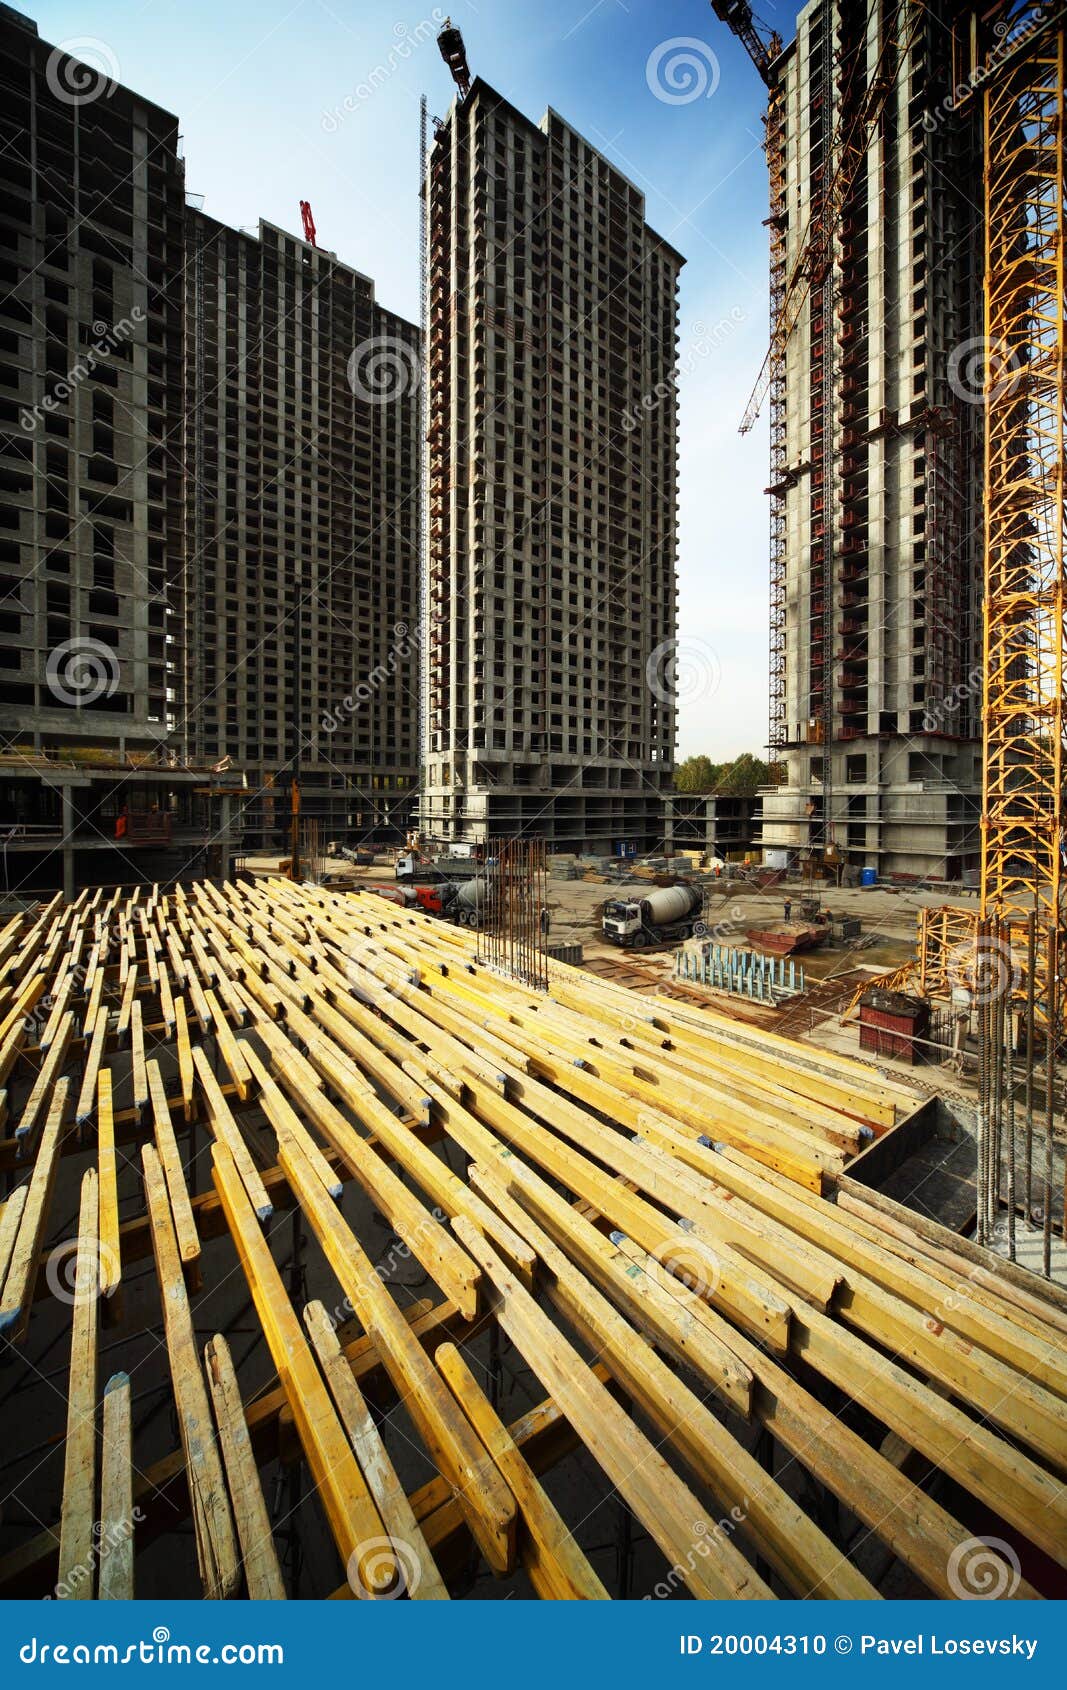 on planking between buildings under construction